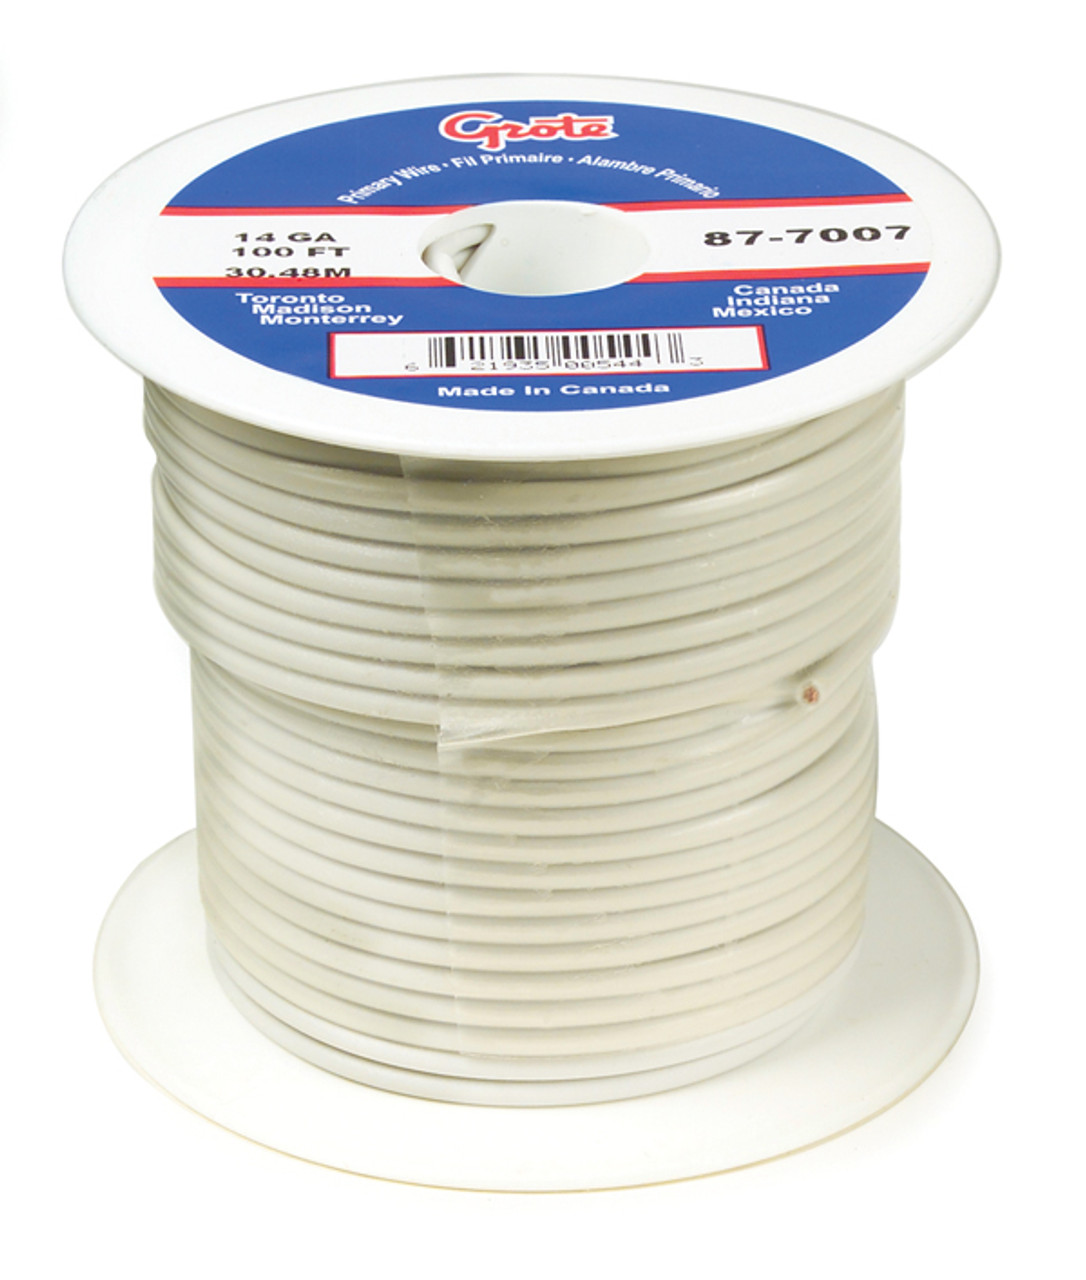 18 AWG General Purpose Thermo Plastic Wire @ 25' - White  89-9007